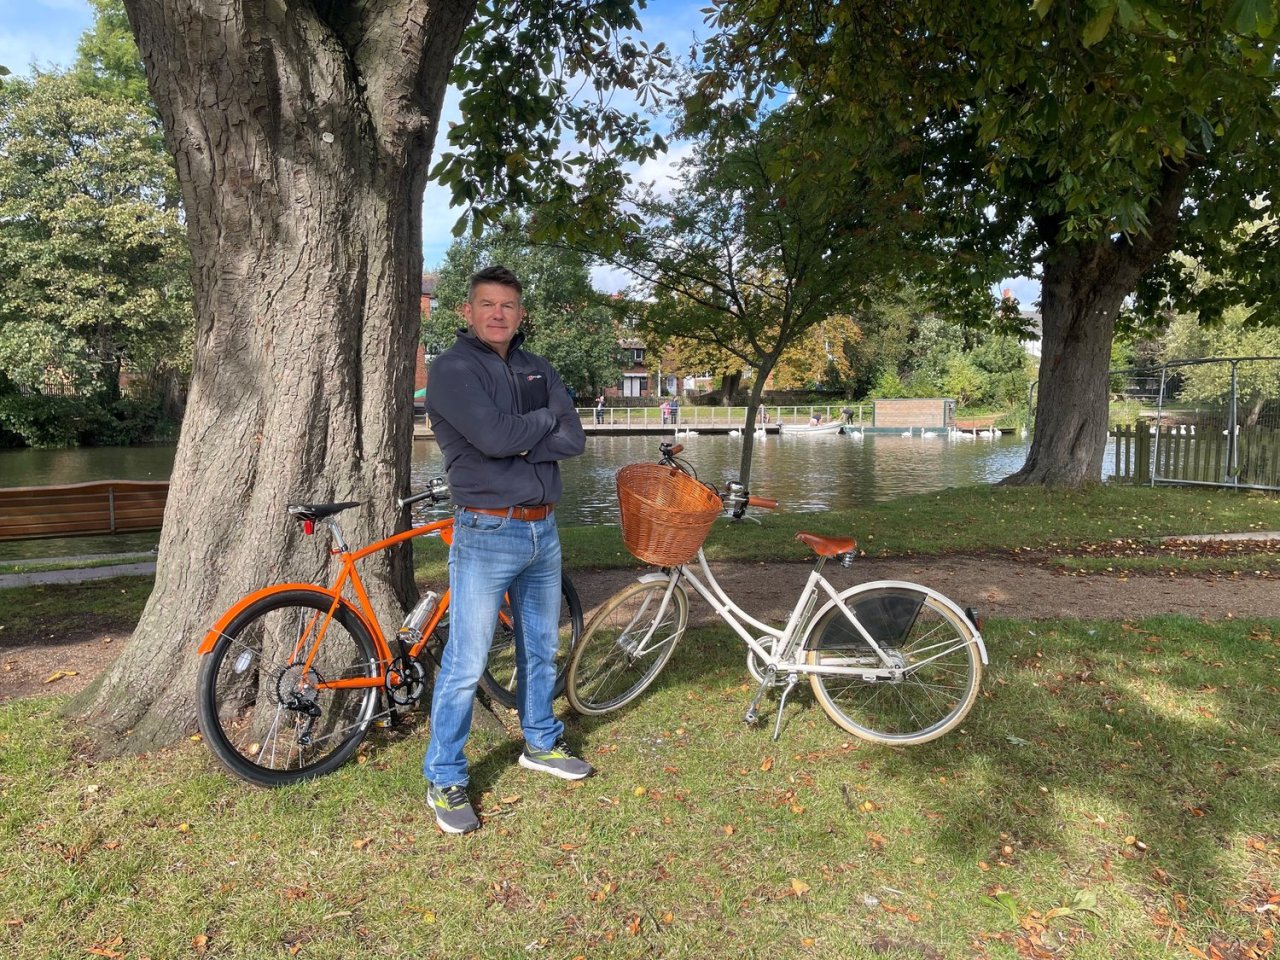 ‘Pashley People’
Here’s my entry in the Pashley Cycles ‘Who’s who’ …
https://www.traditionalcycleshop.co.uk/blog/2021/2/9/pashley-people-steve-deeks